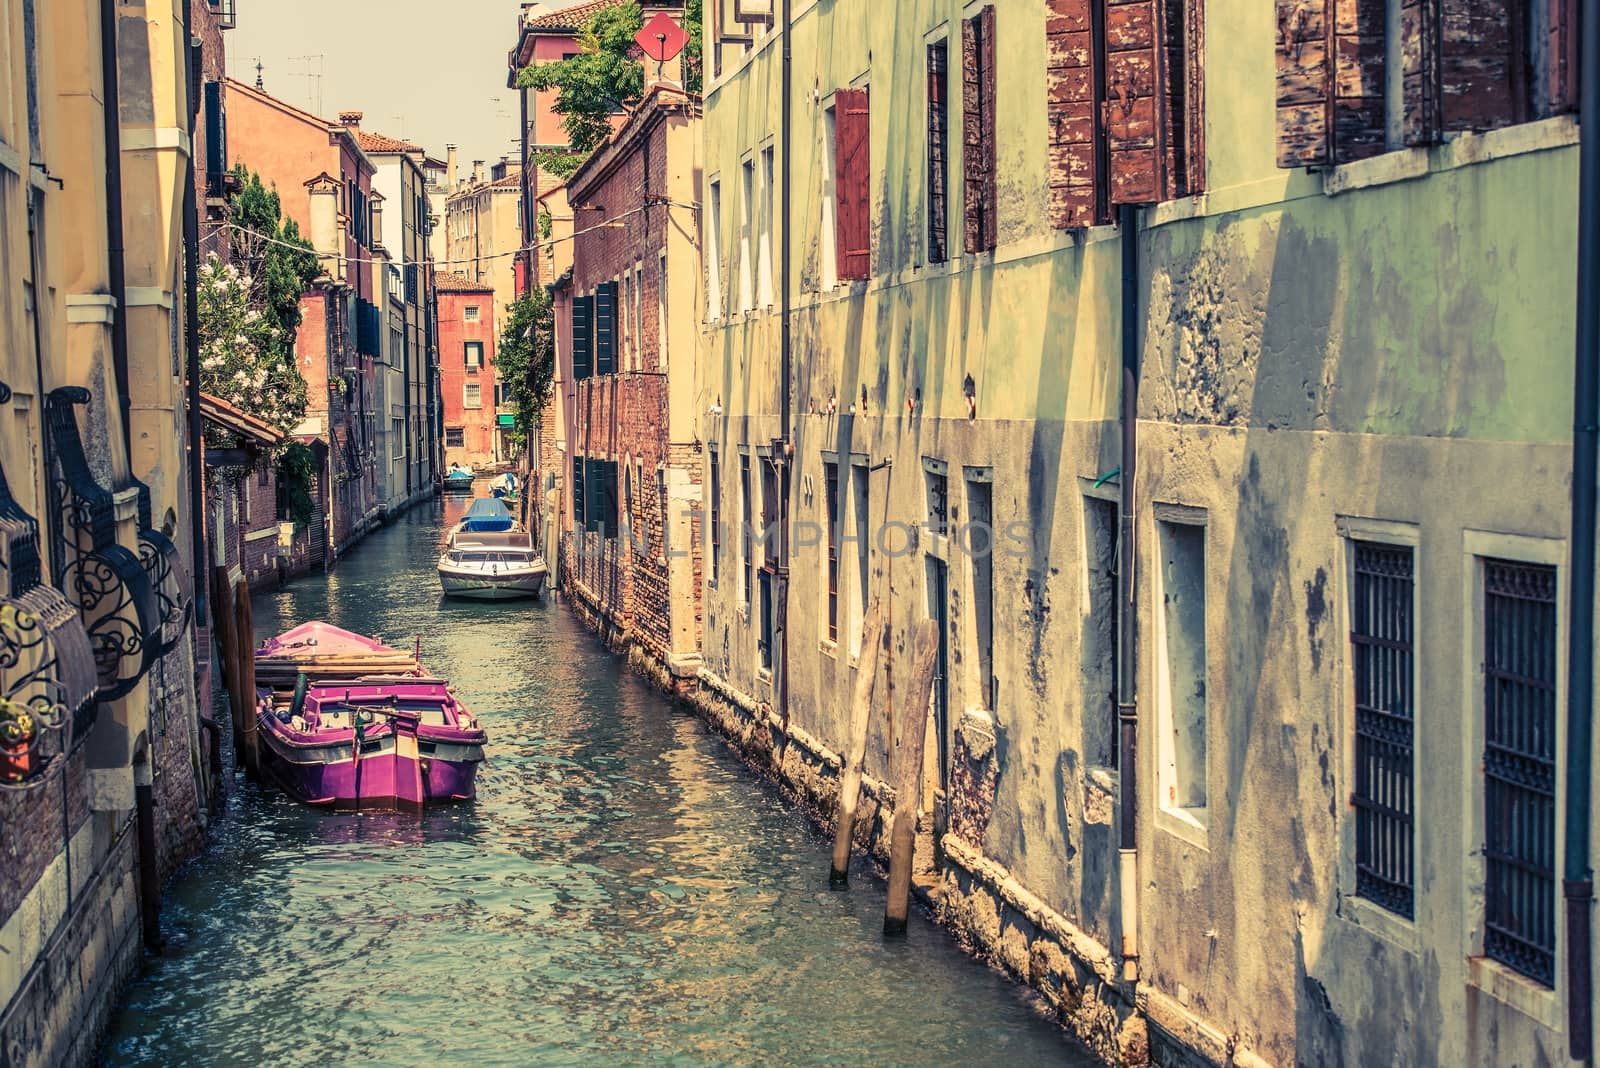 Venice Canal Architecture by welcomia